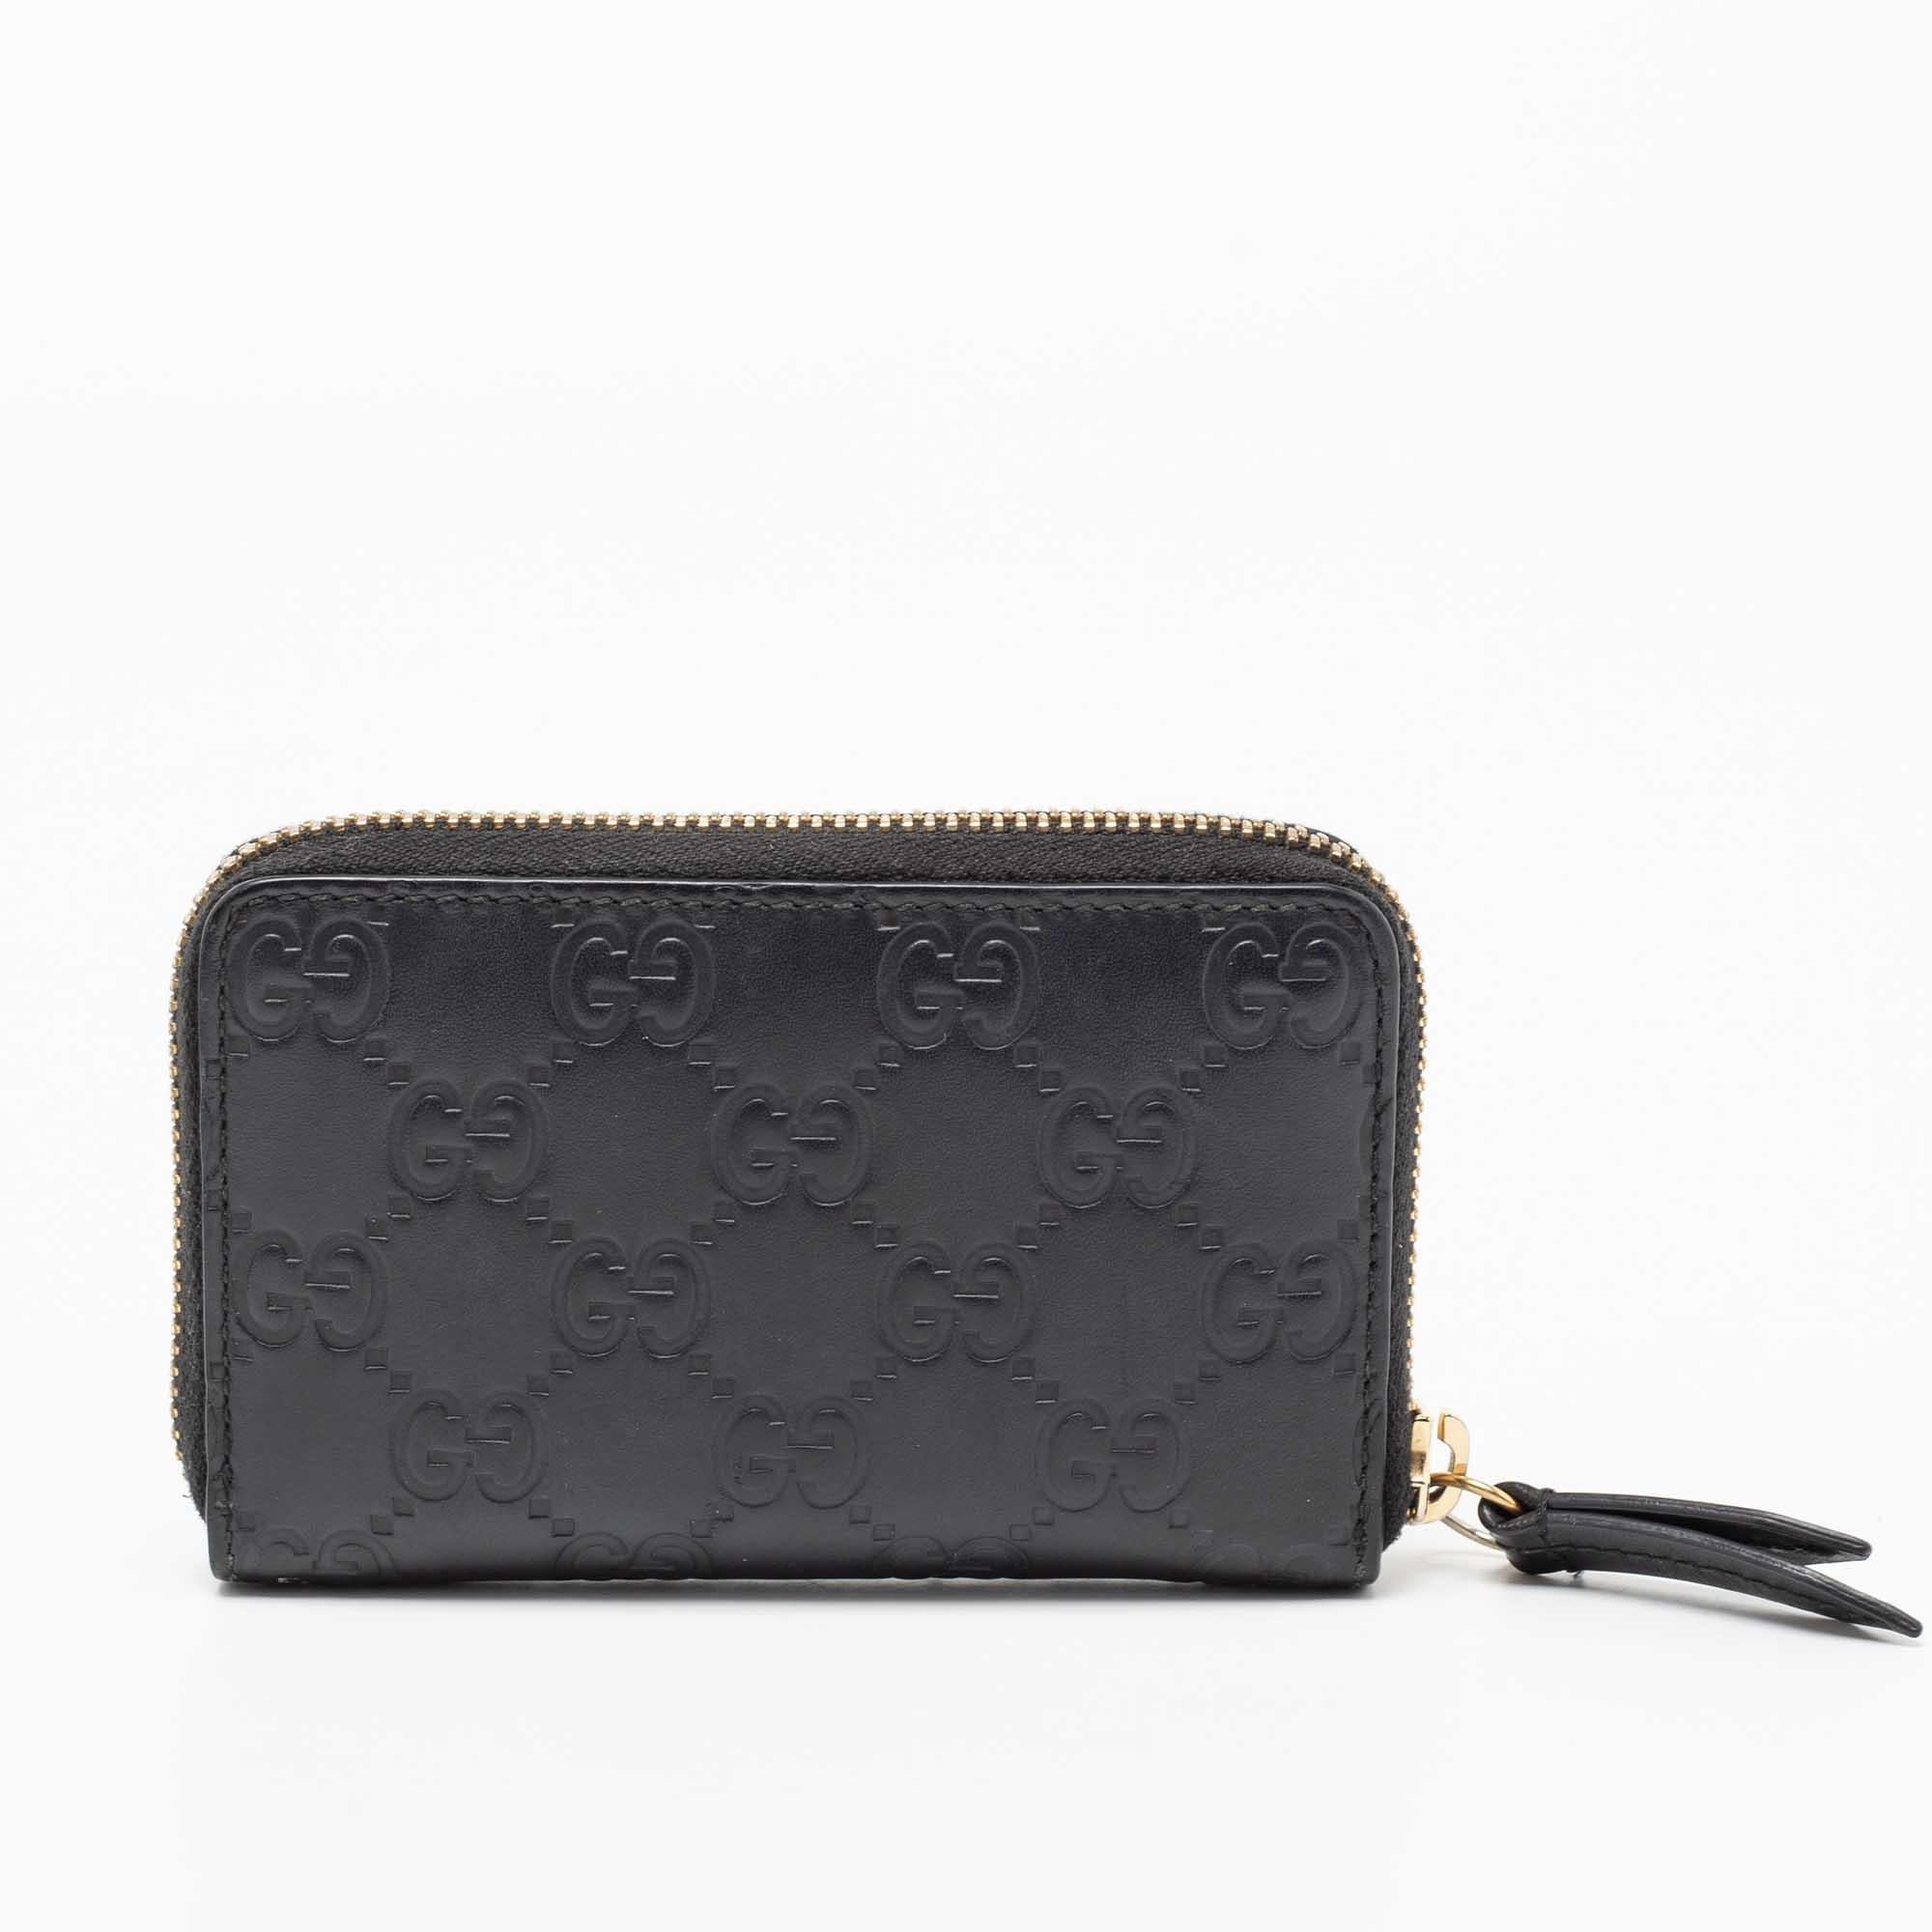 To store all your currencies and cards, this card case from the House of Gucci is the best accessory to trust. It is created using black Guccissima leather and features a zip-around that opens to a leather-lined interior. Gold-tone hardware adds a